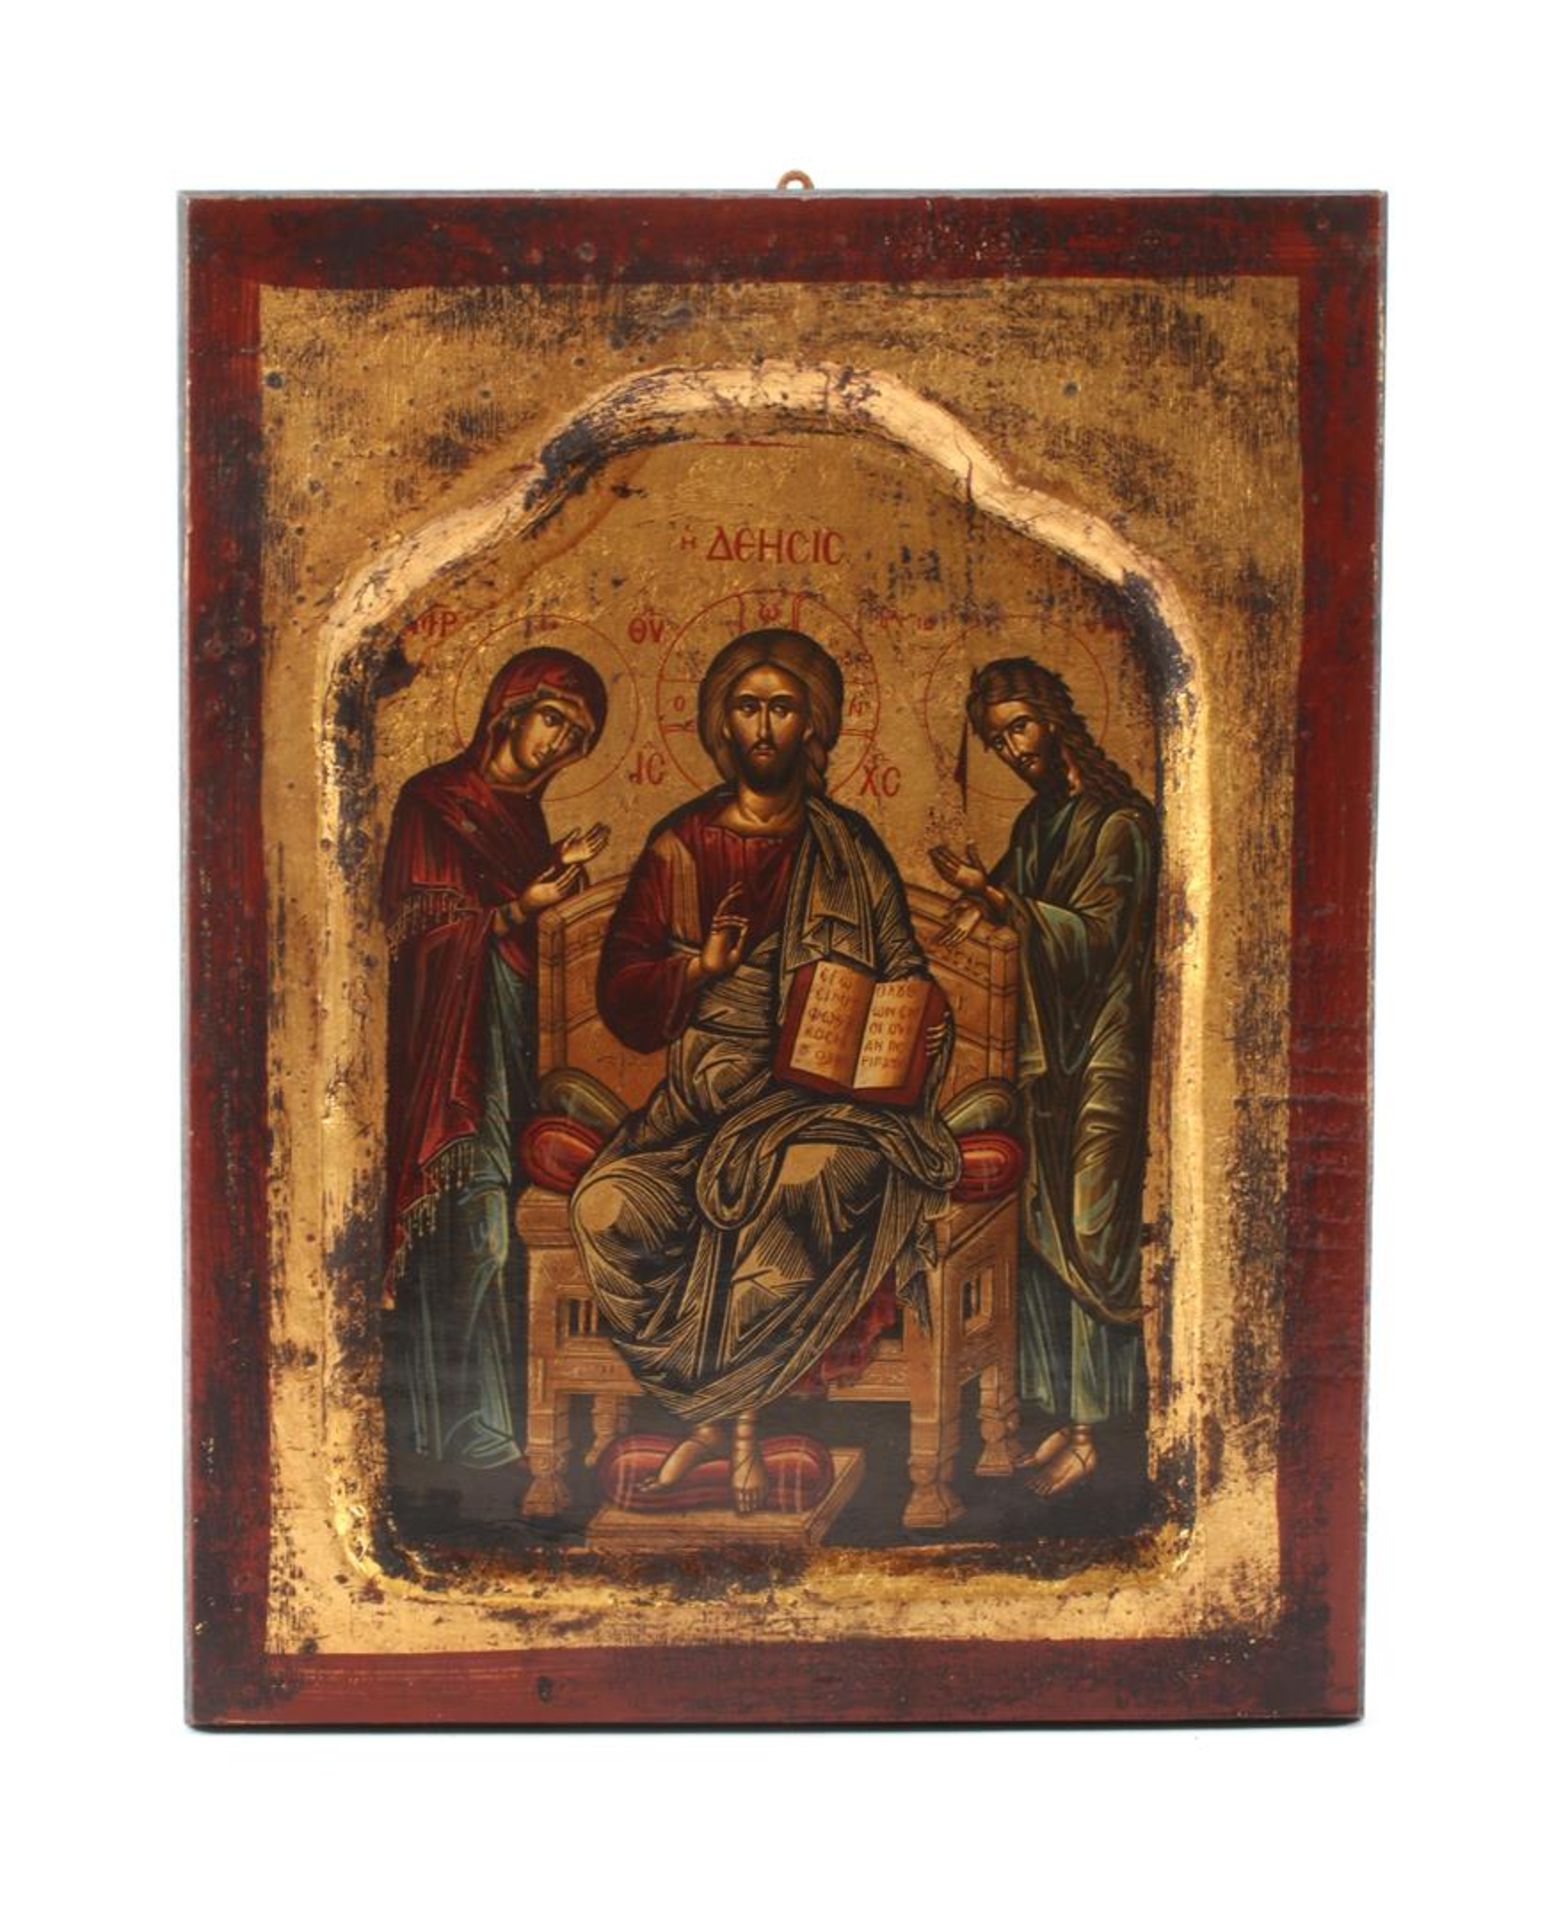 Byzantine icon depicting Christ with bible in hand, sitting on the throne, with Mary and Saint